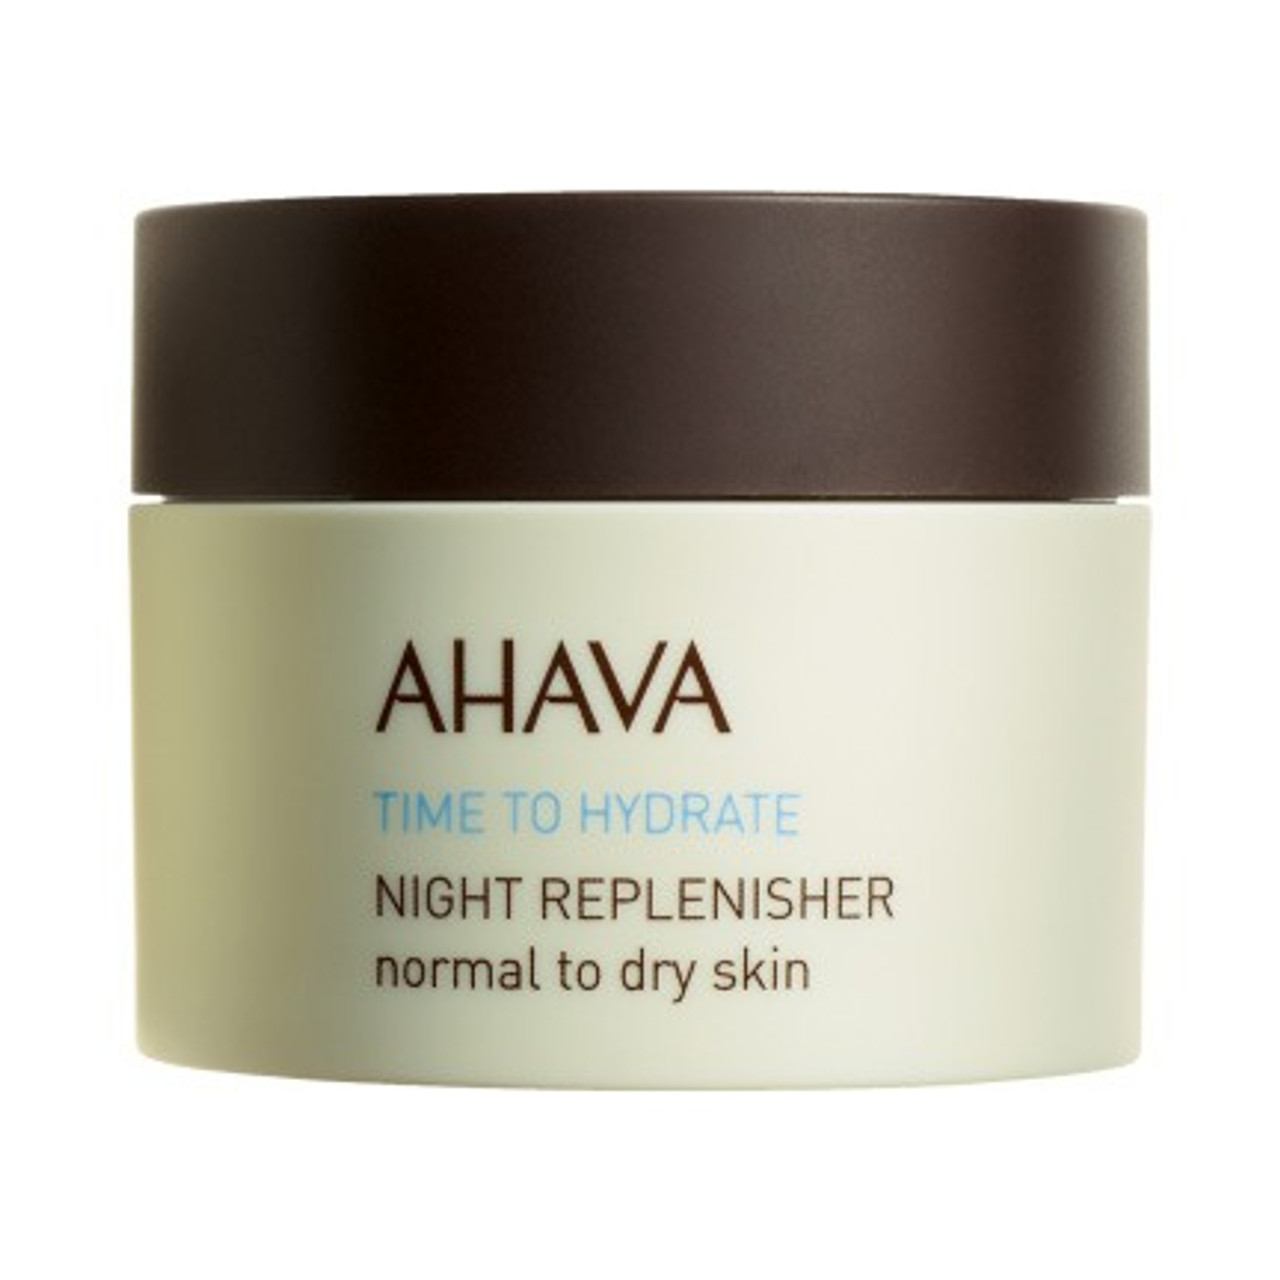 AHAVA Time To Hydrate Night Replenisher - Normal to Dry Skin - 1.7 oz